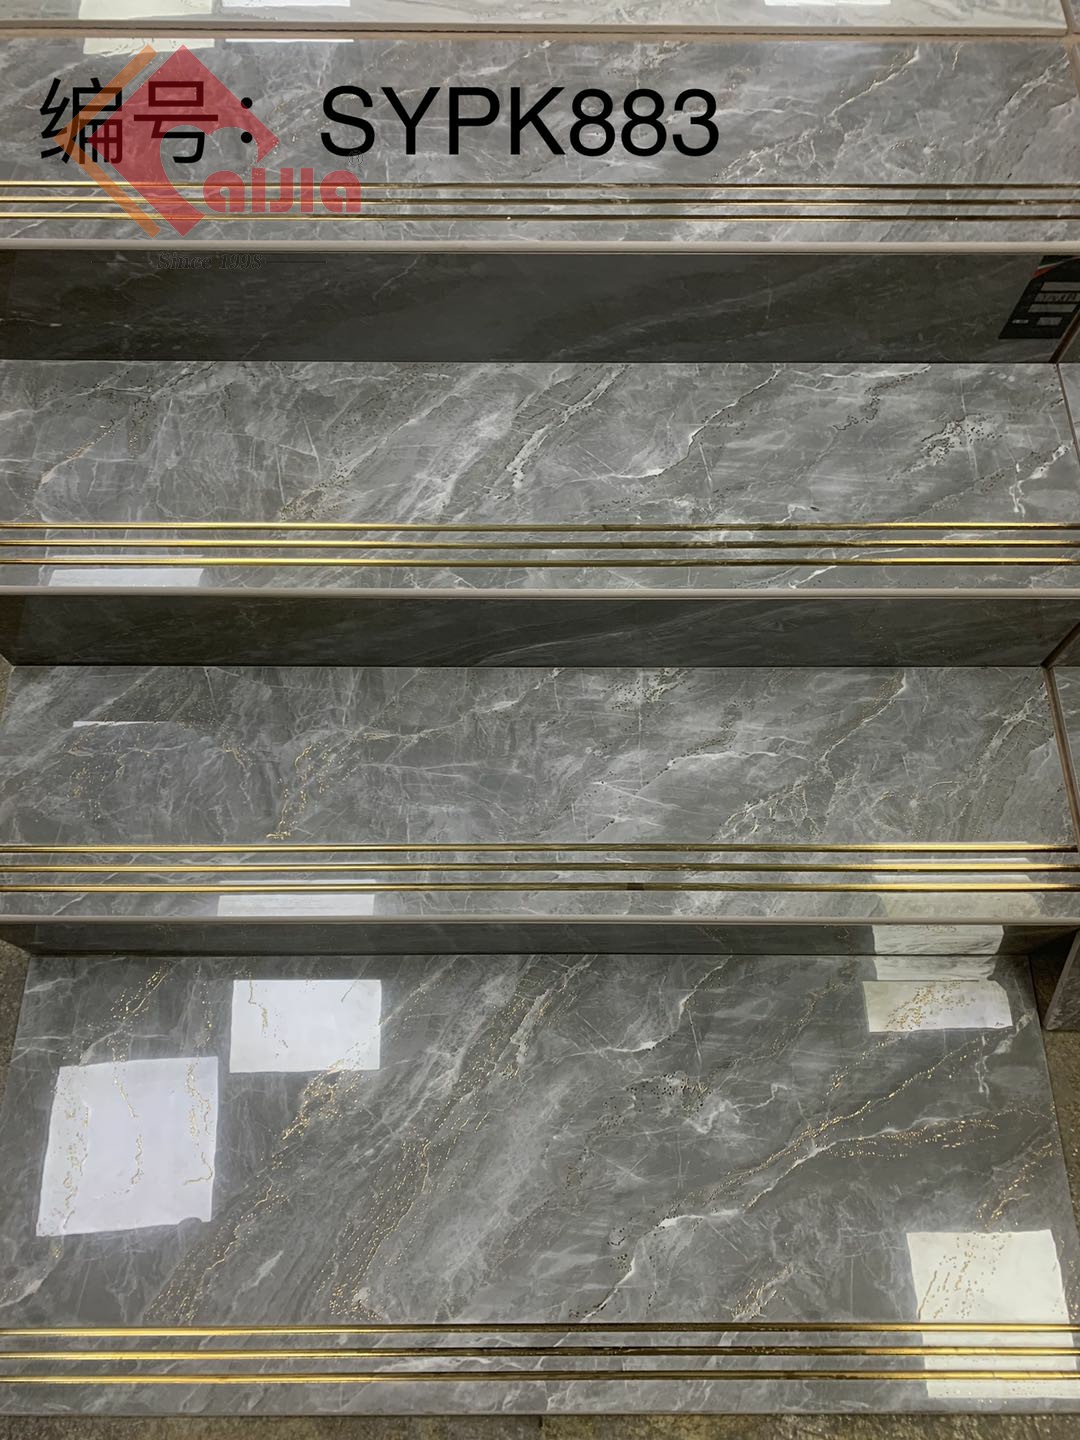 1200X470X11.5 With Gold Or Silver AJSYPK883